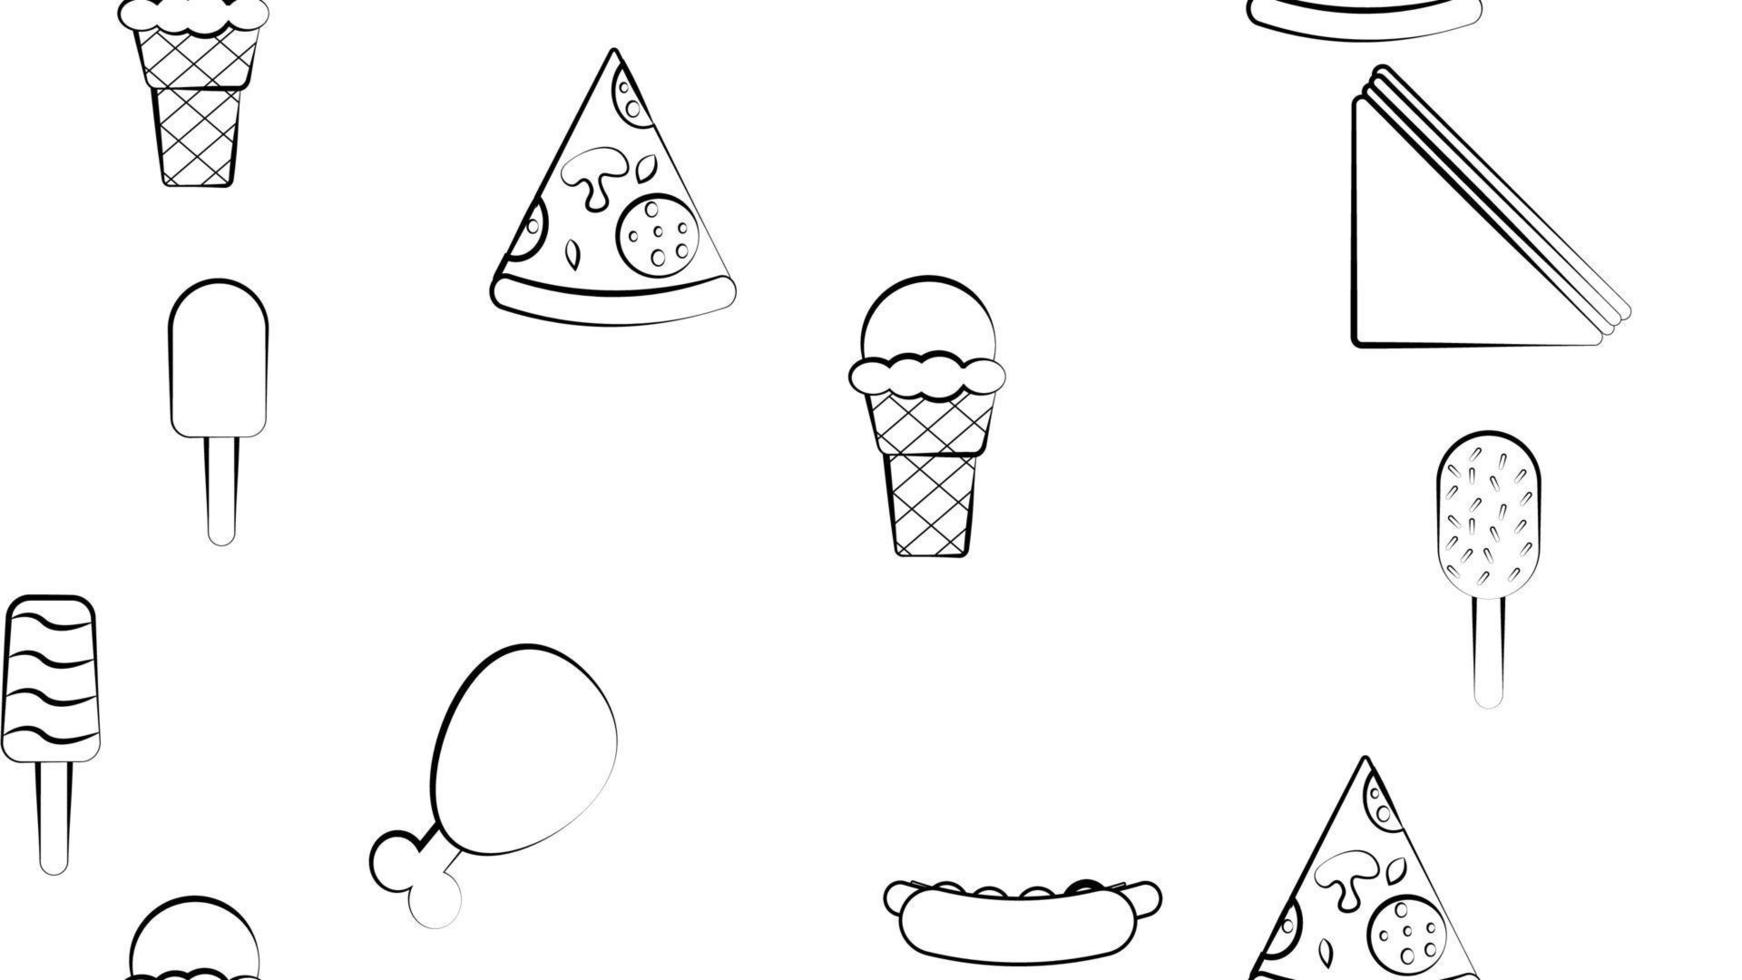 Black and white endless seamless pattern of food and snack items icons set for restaurant bar cafe hot dog, sandwich, ice cream, chicken, pizza. The background vector